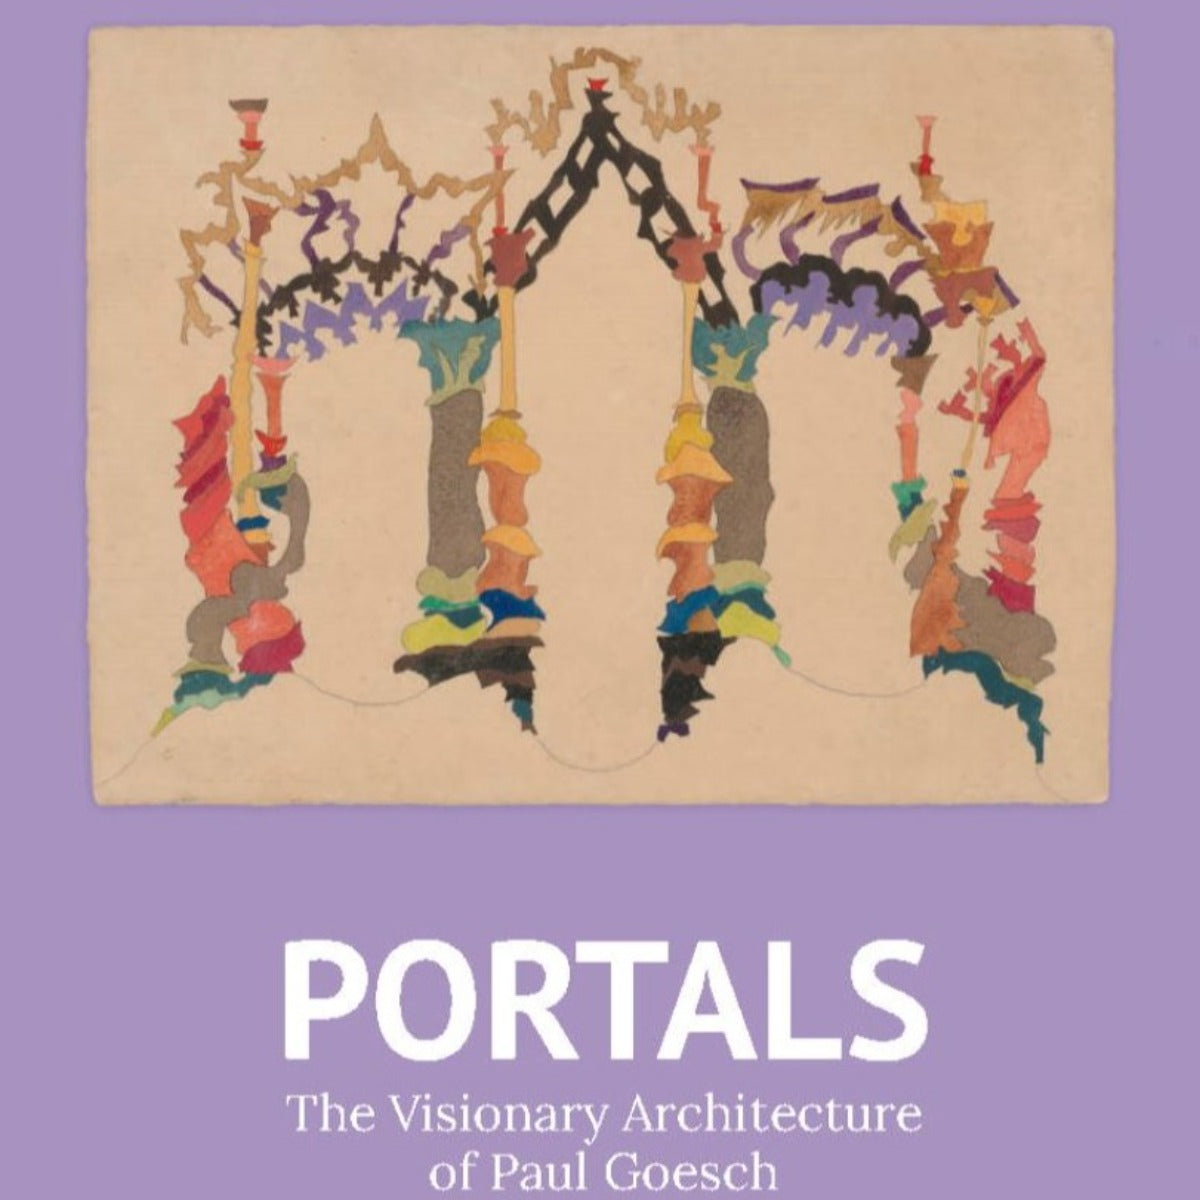 PORTALS: THE VISIONARY ARCHITECTURE OF PAUL GOESCH